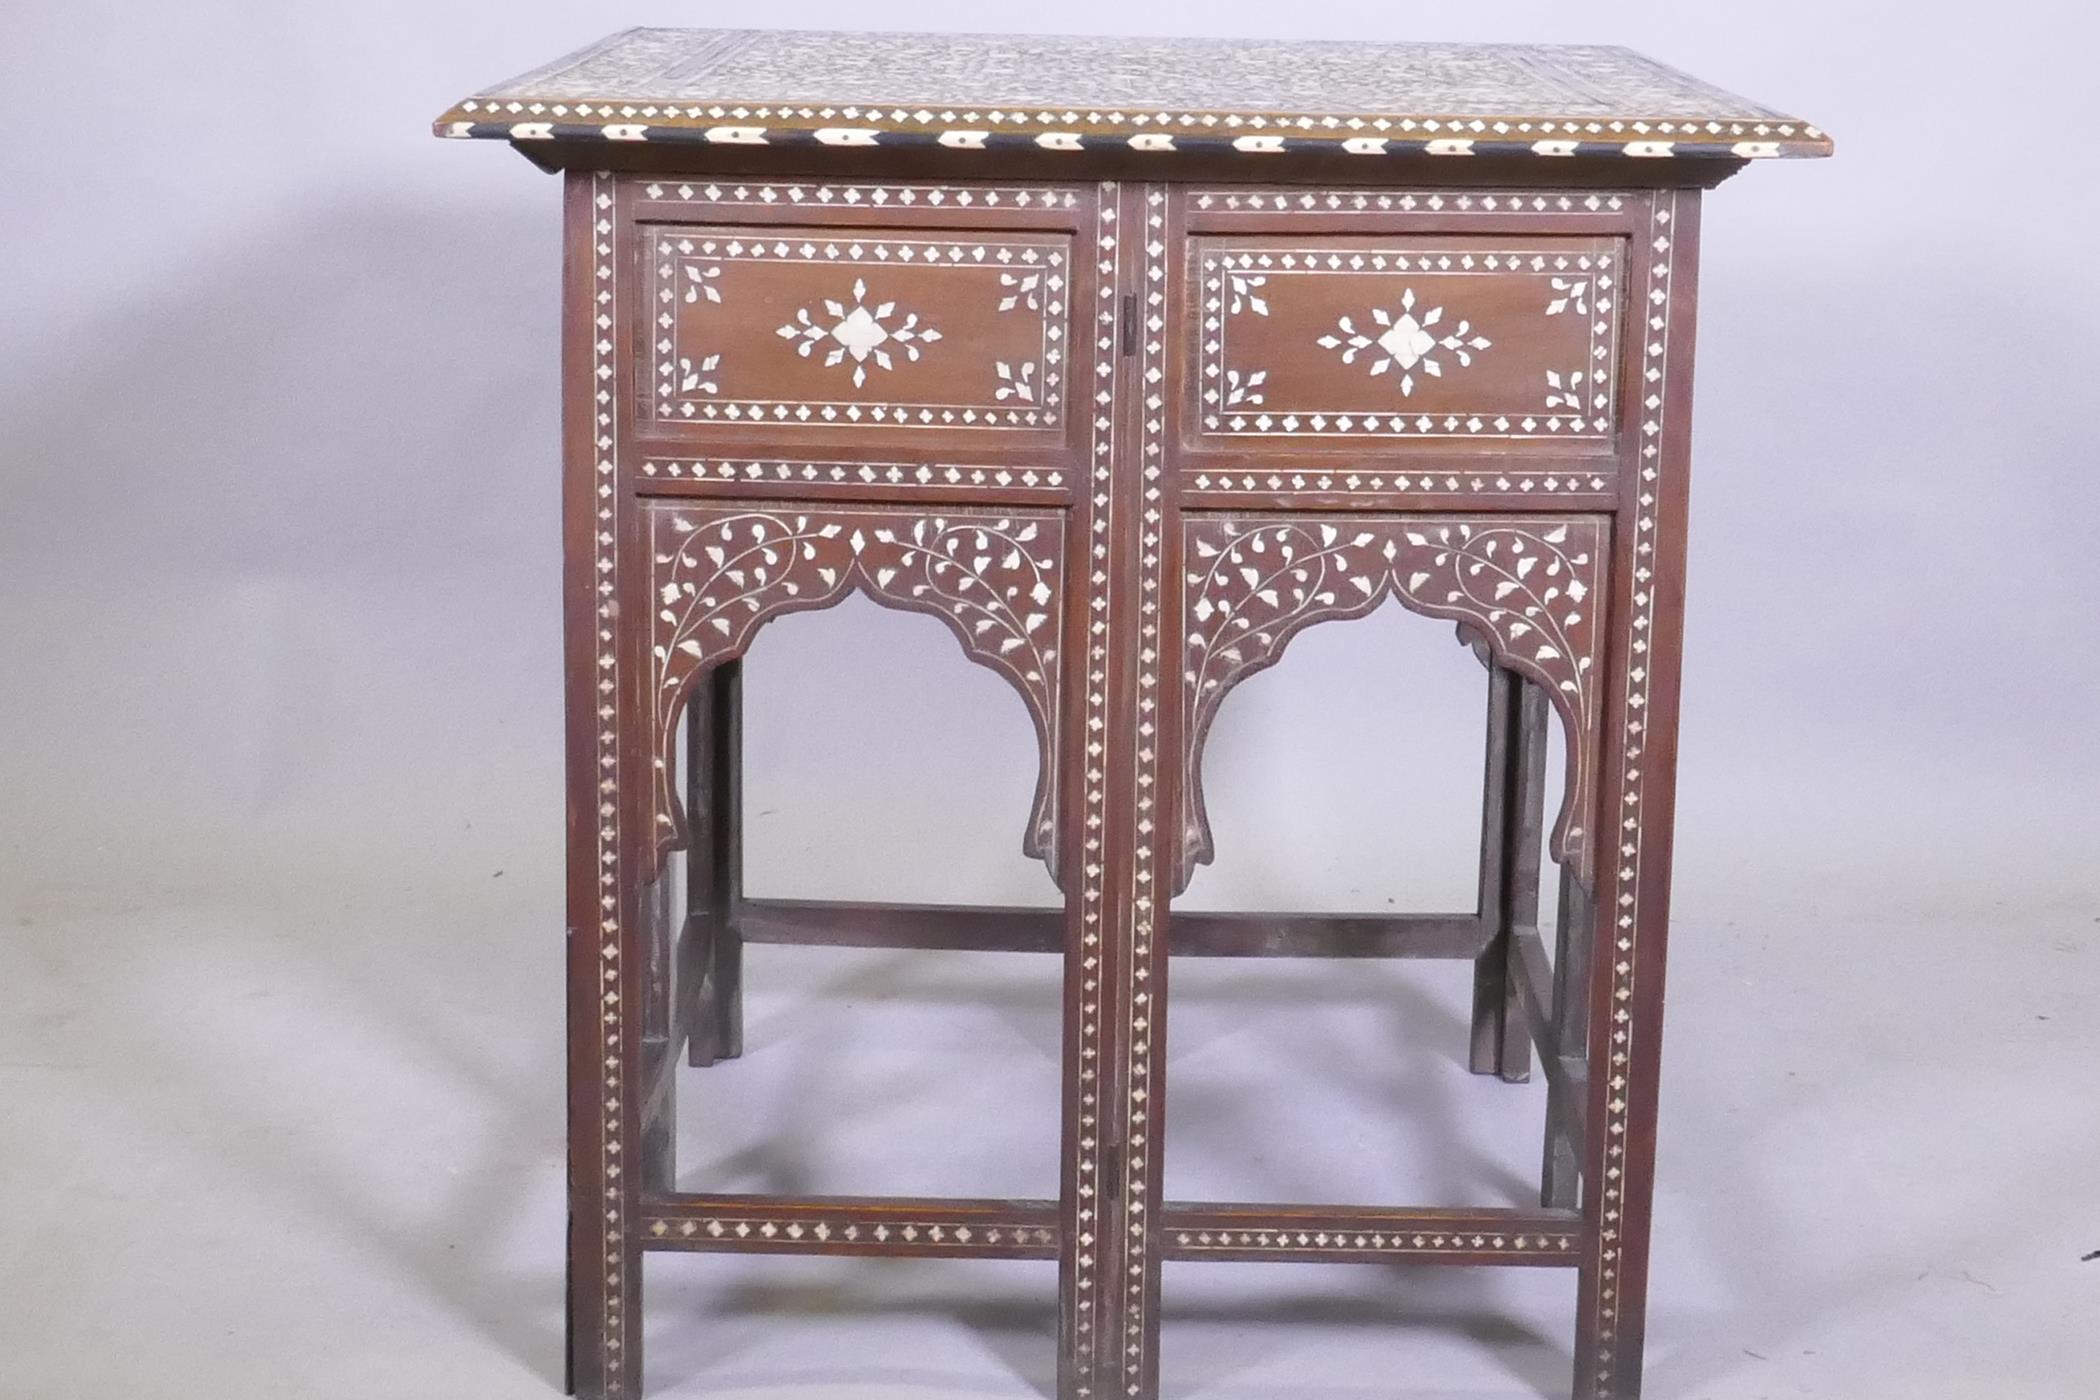 A C19th Moorish table with inlaid decoration and folding base, 61 x 61 x 63cm - Image 3 of 5